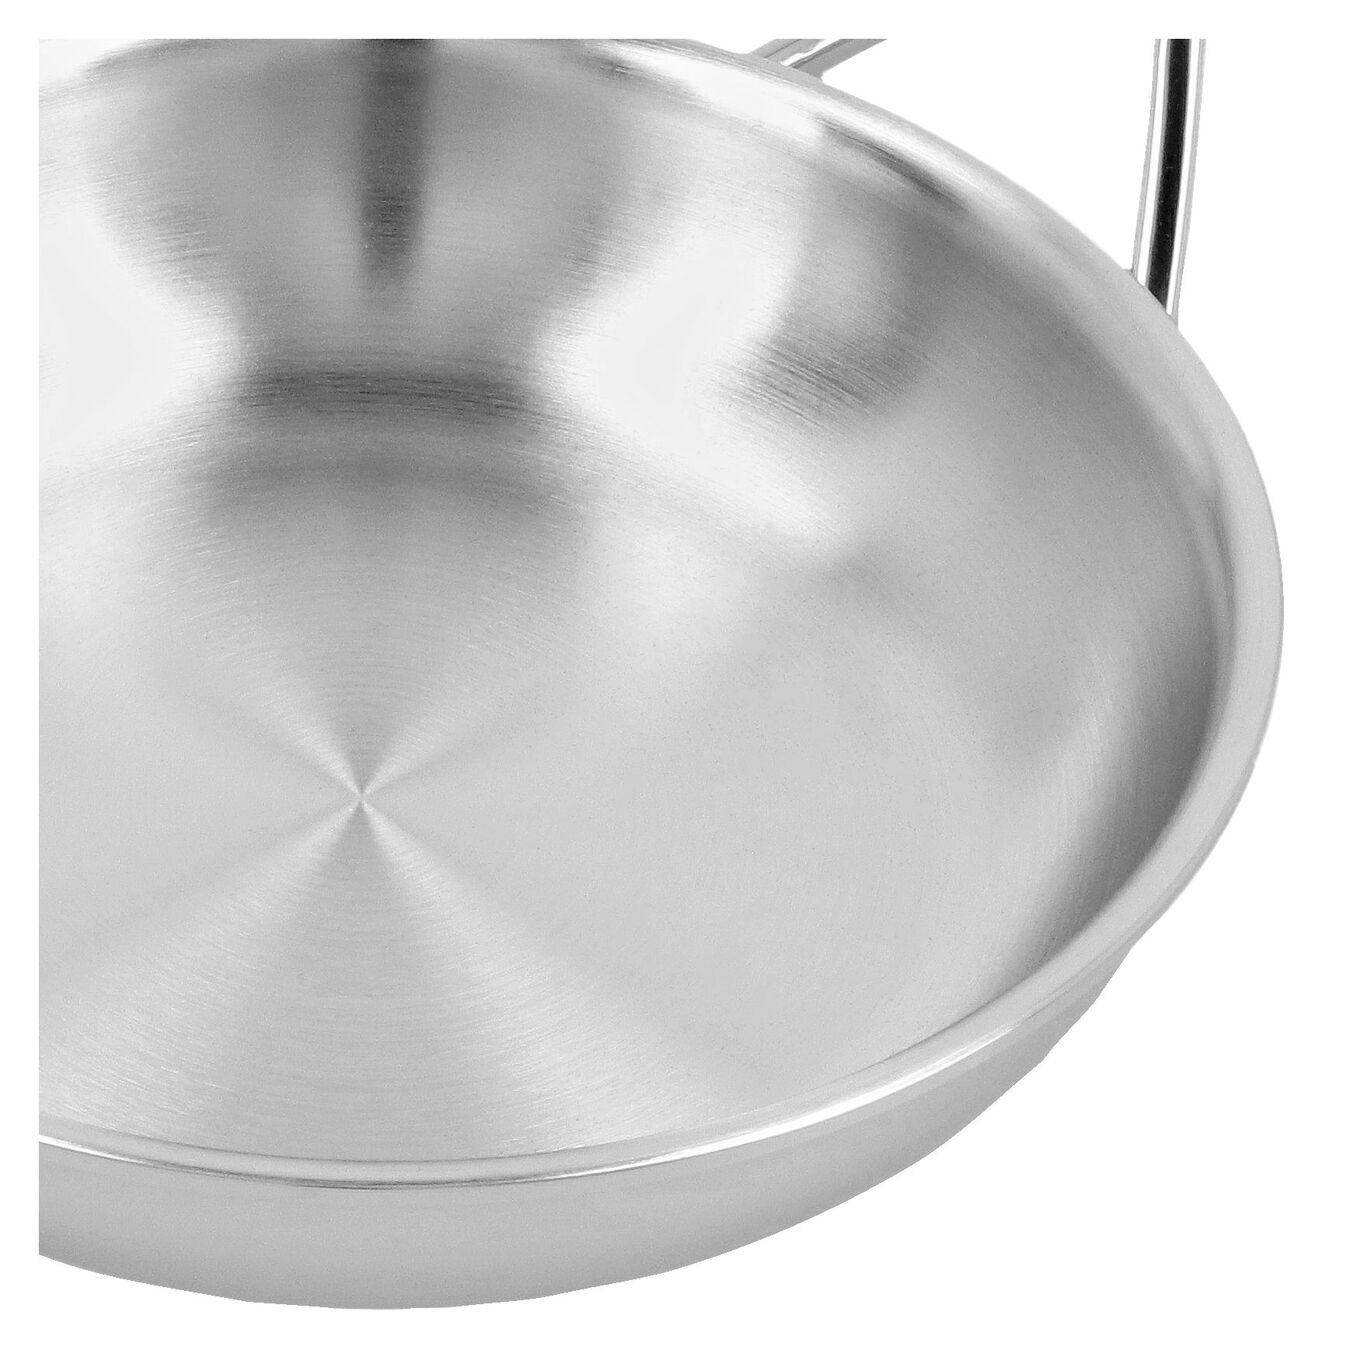 20 cm 18/10 Stainless Steel Frying pan silver,,large 4